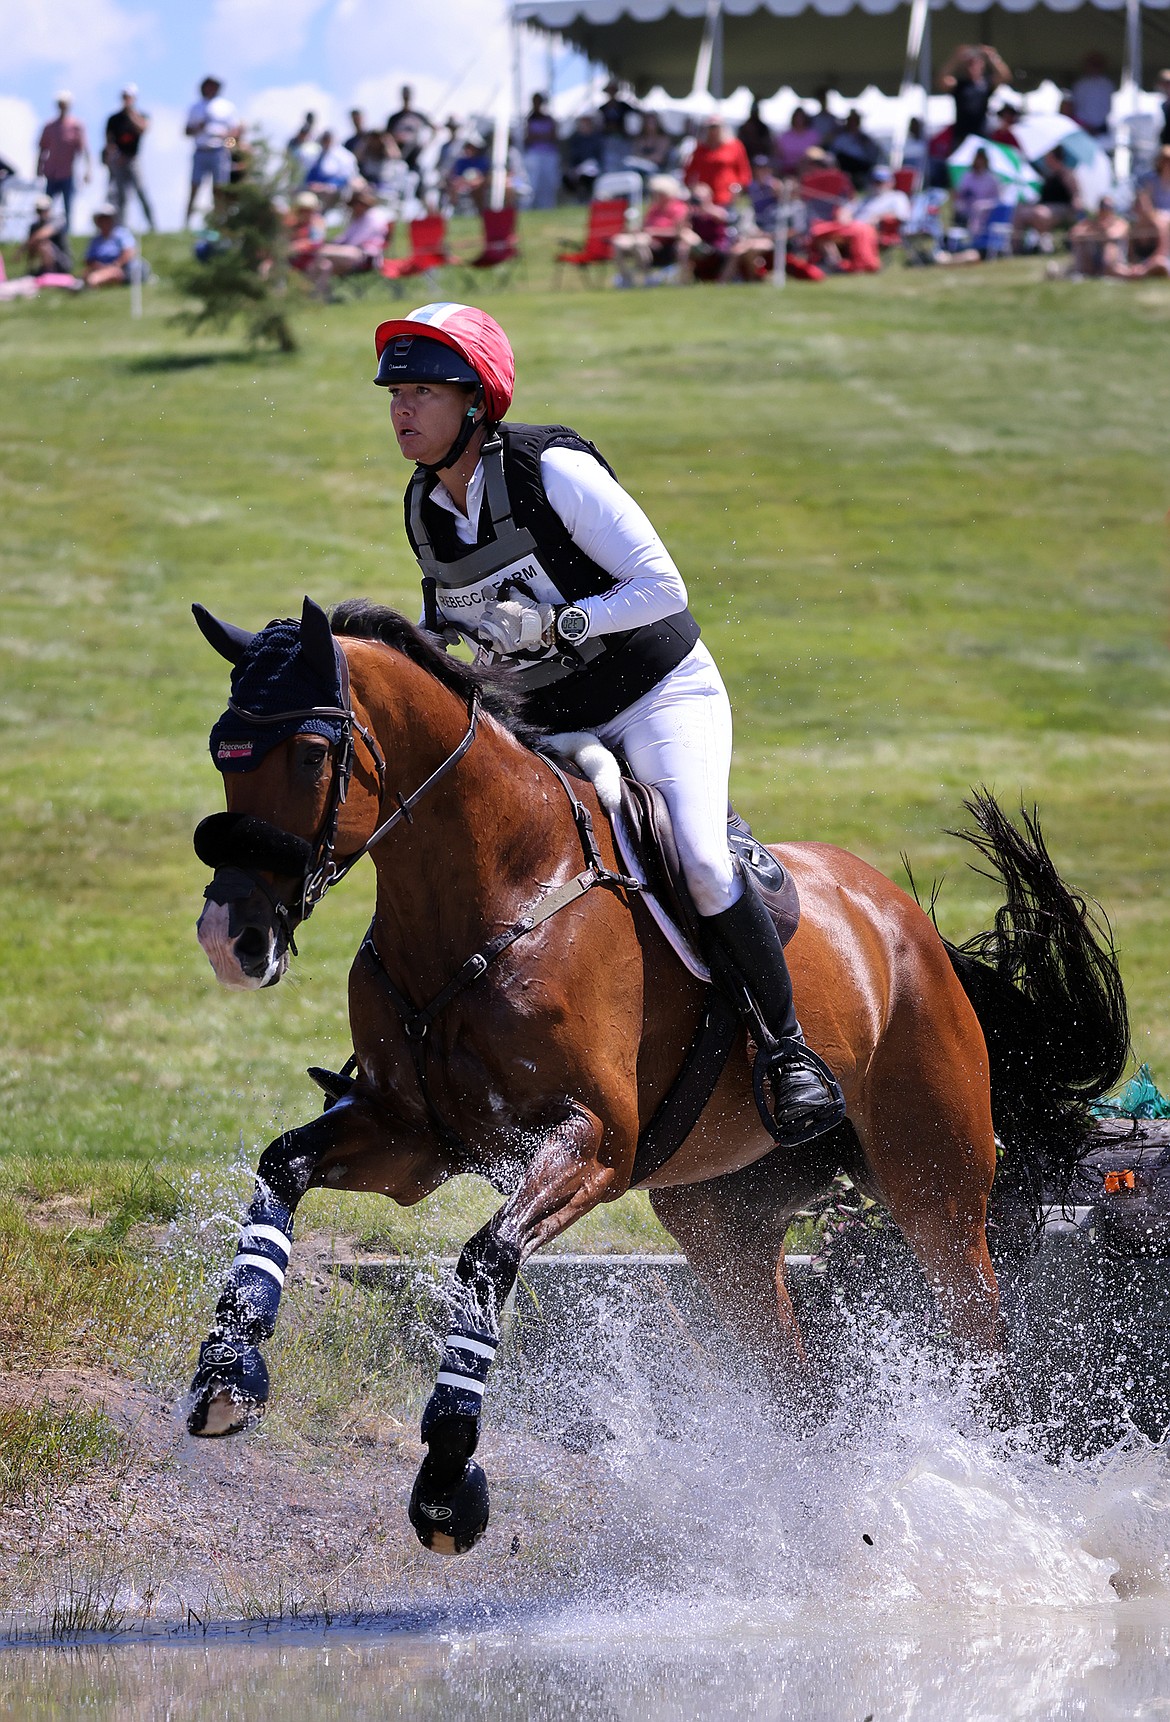 Tamra Smith rides "Solaguayre California" through the second water feature of the three-star long course at The Event at Rebecca Farm July 23. (Jeremy Weber/Daily Inter Lake)